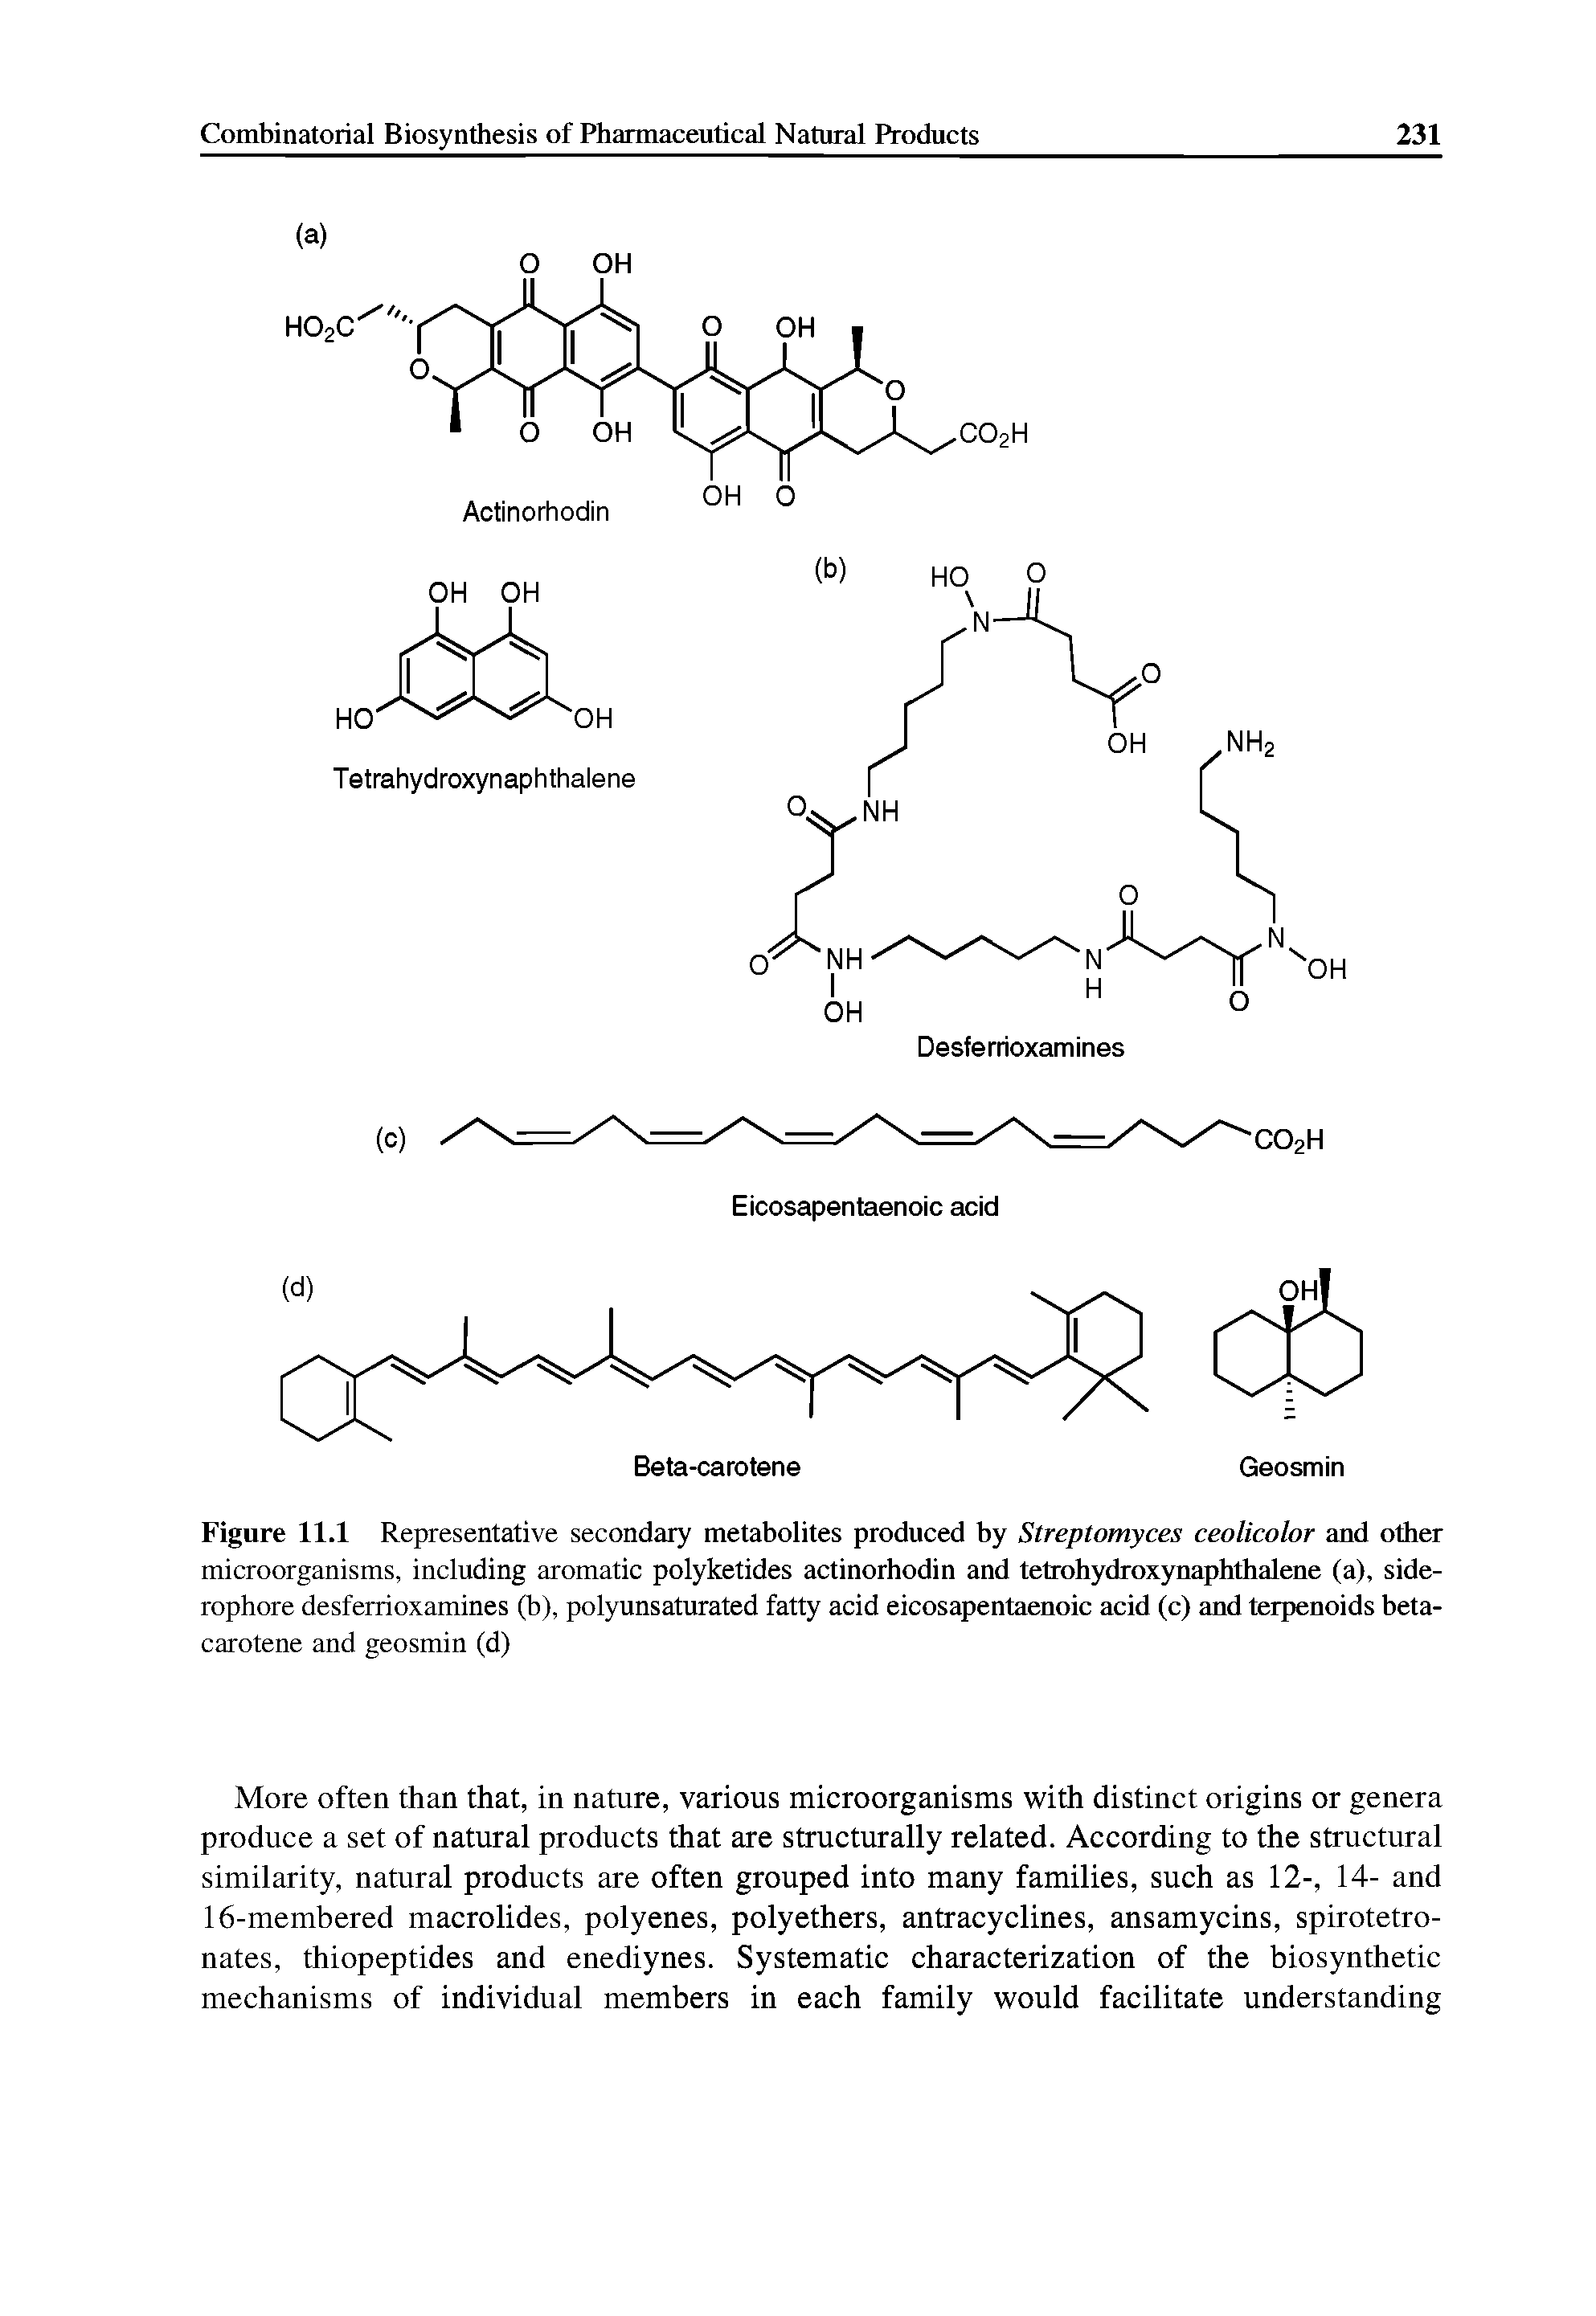 Figure 11.1 Representative secondary metabolites produced by Streptomyces ceolicolor and other microorganisms, including aromatic polyketides actinorhodin and tetrohydroxynaphthalene (a), side-rophore desferrioxamines (b), polyunsaturated fatty acid eicosapentaenoic acid (c) and terpenoids beta-...